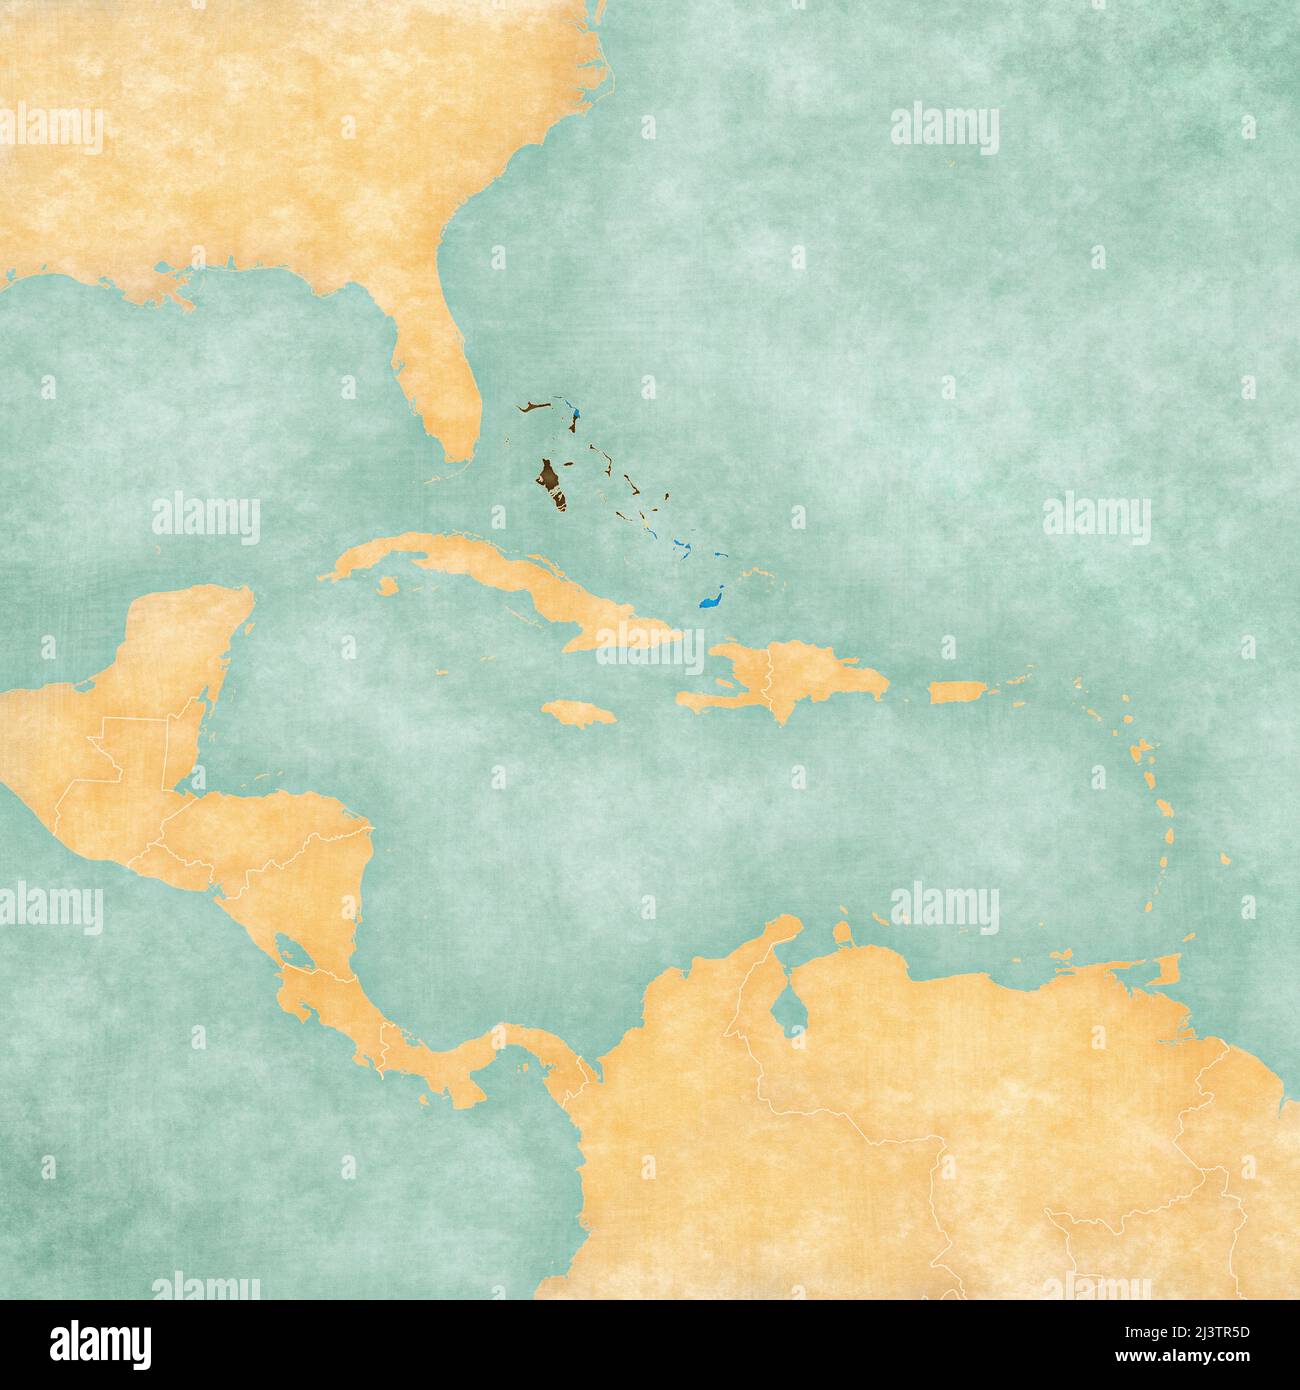 The Bahamas (Bahamian flag) on the map of Caribbean and Central America. The Map is in vintage summer style and sunny mood. The map has a soft grunge Stock Photo